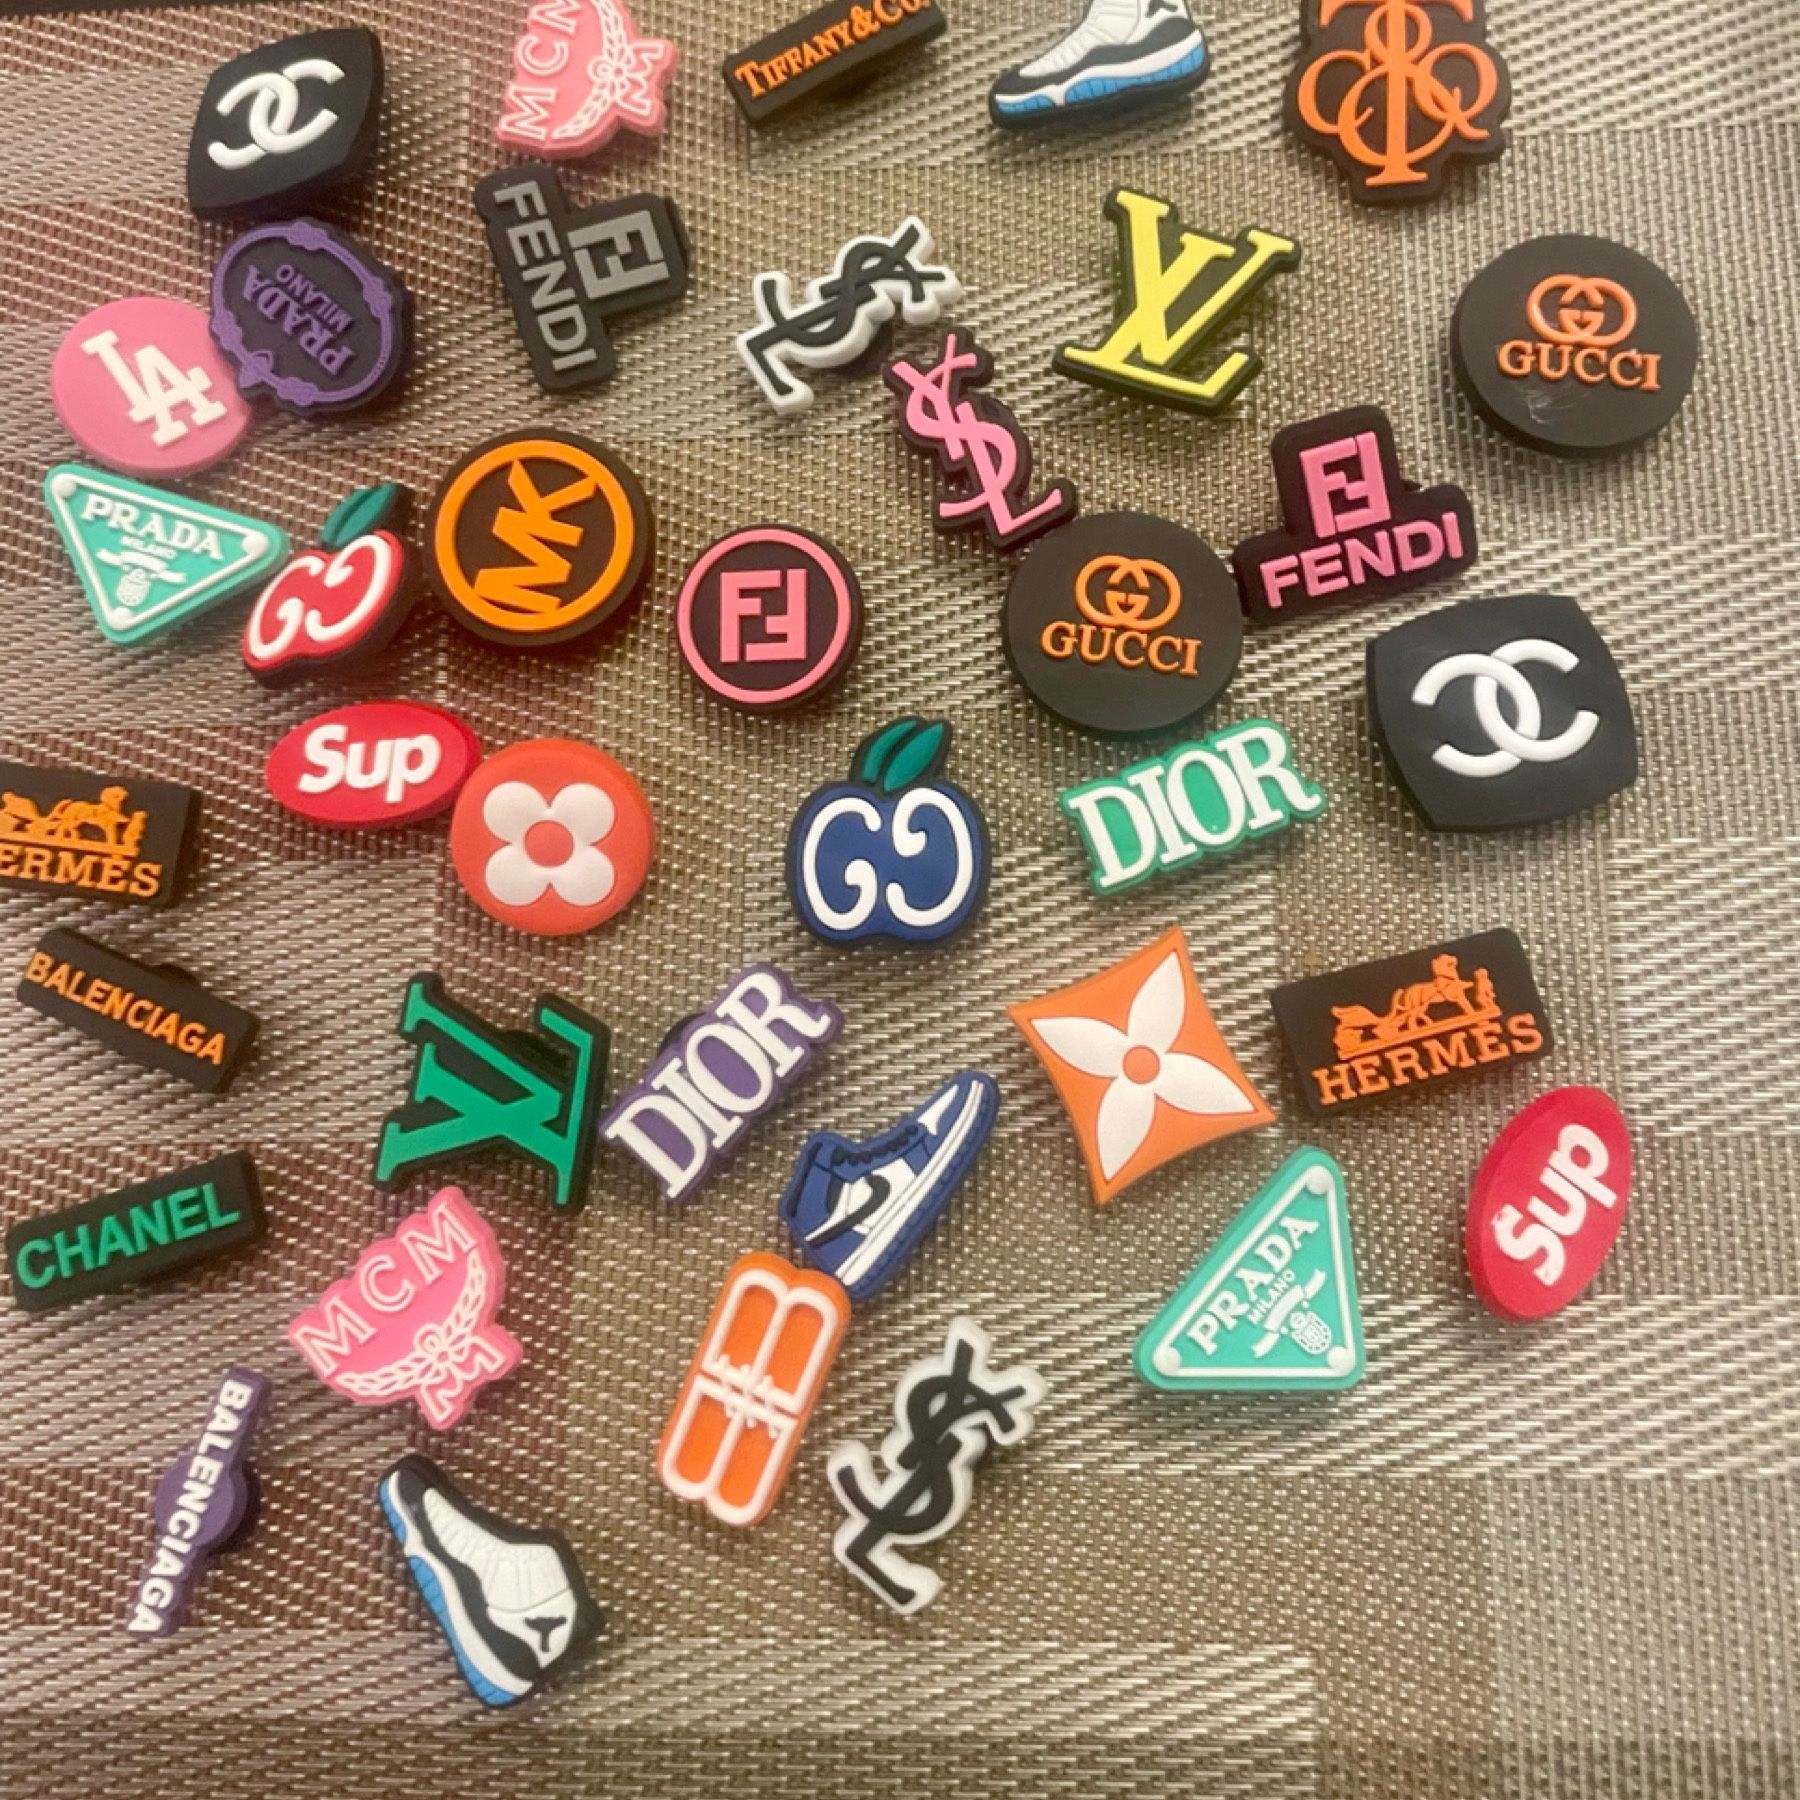 8 Piece Designer Croc Charms Nike/GG/CC/Dior And More for Sale